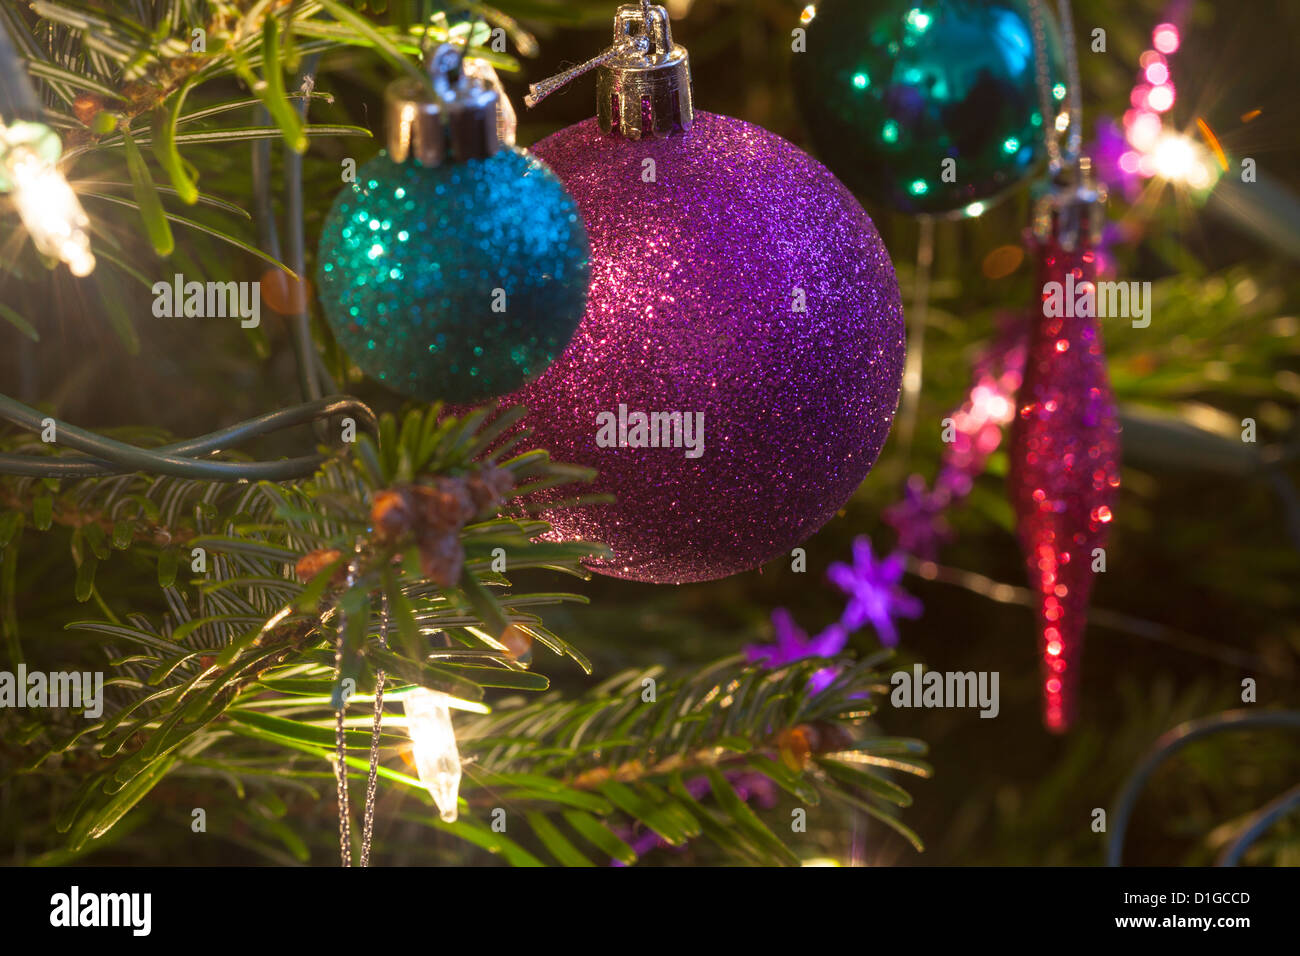 Christmas tree Hordman pine fir decorated with twinkling lights and baubles in green purple and pink, some blurred out of focus Stock Photo